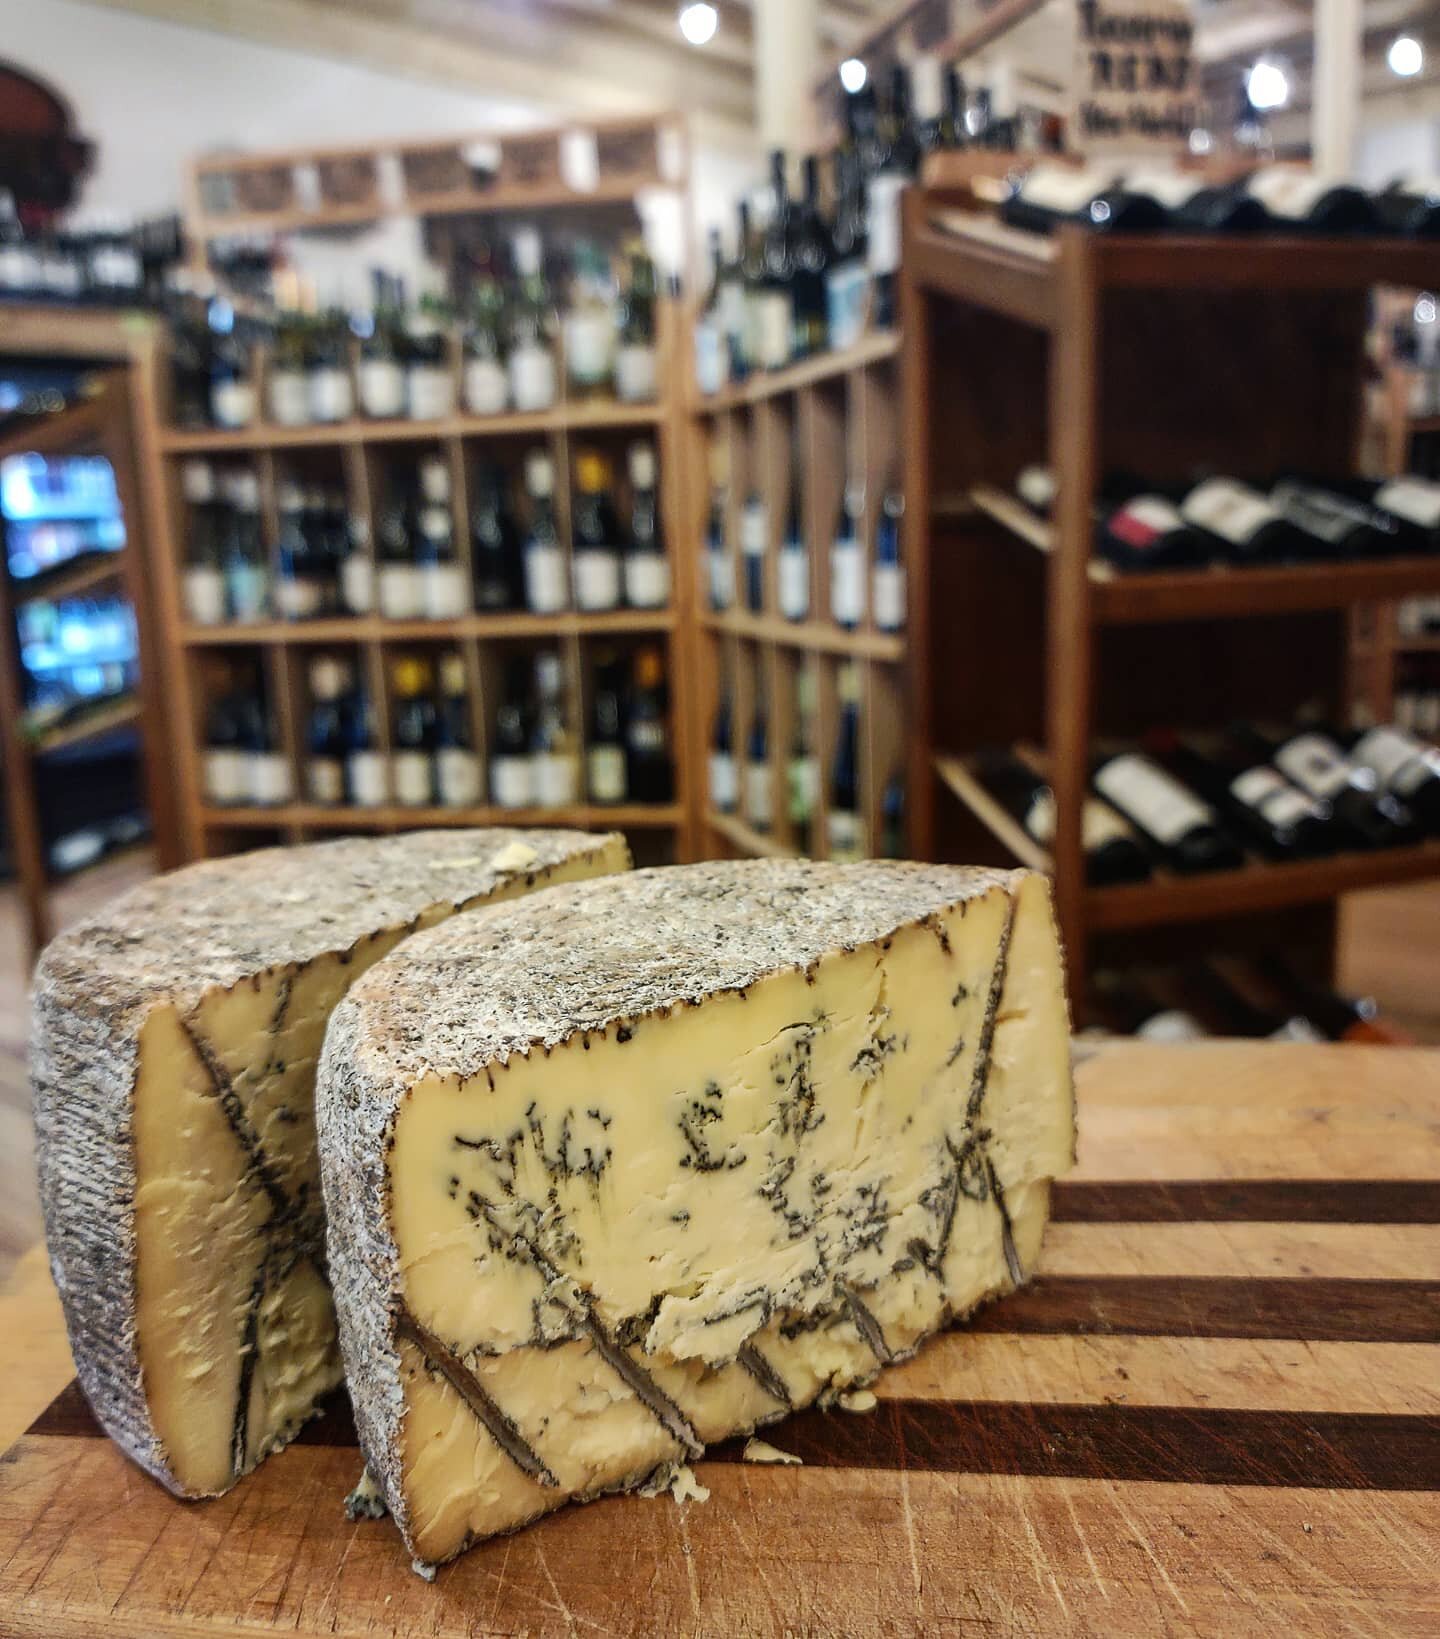 New cheese: Fraffie from @springdaycreamery is 110% our favorite blue cheese at the moment. It's like a butty pecan pie somehow acquired beautiful blue veining. A dab of honey and a glass of port and you legit have the most decadent dessert on the pl